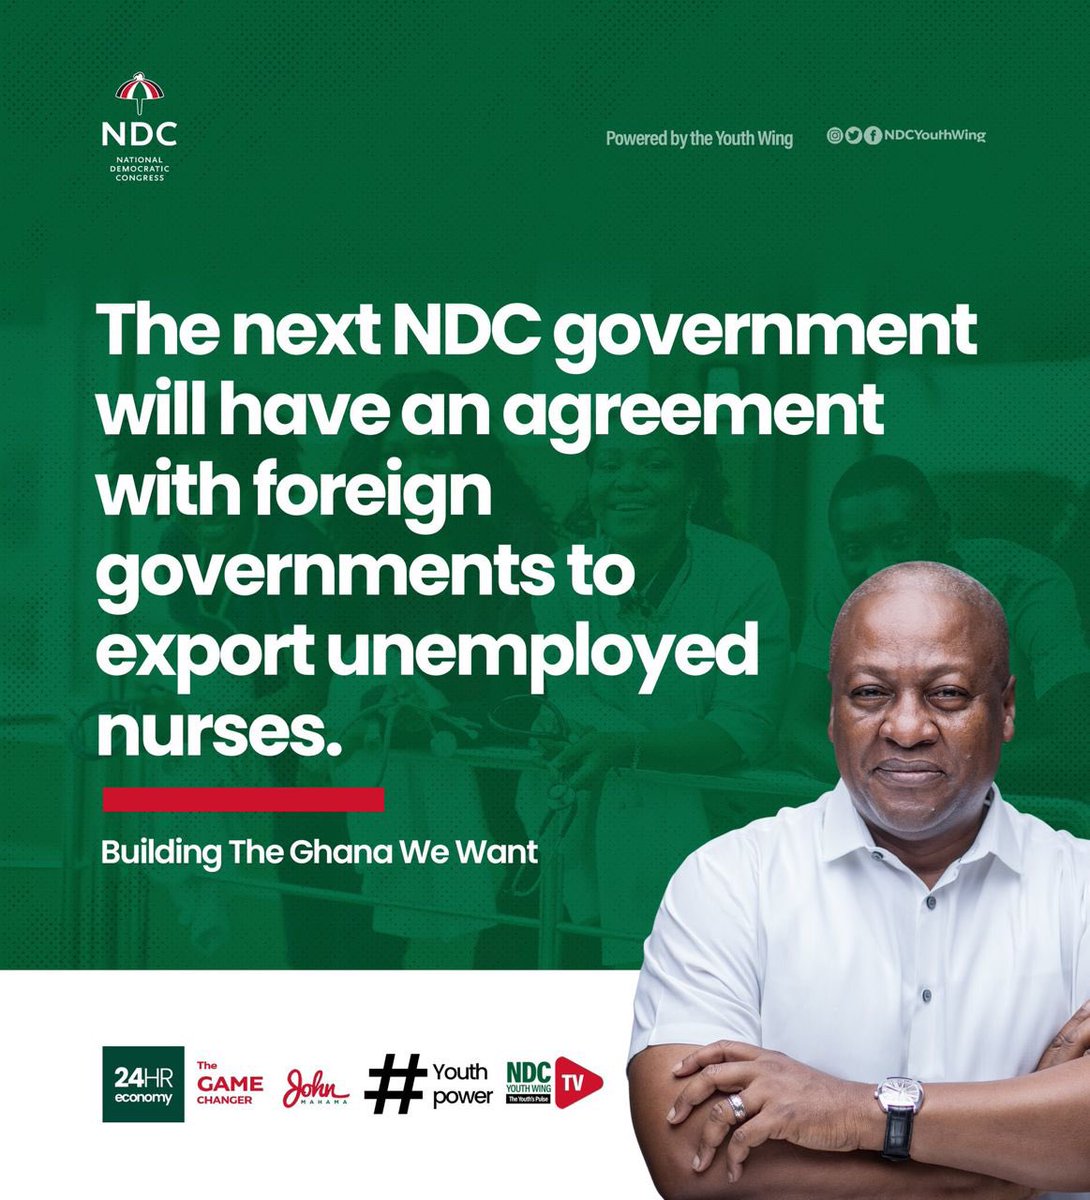 Exciting News for Ghanaian Nurses from the Next NDC government‼️‼️‼️

John Mahama and his NDC government look forward to working in partnership with foreign governments to export trained but unemployed nurses. #ChangeIsComing #24HourEconomy